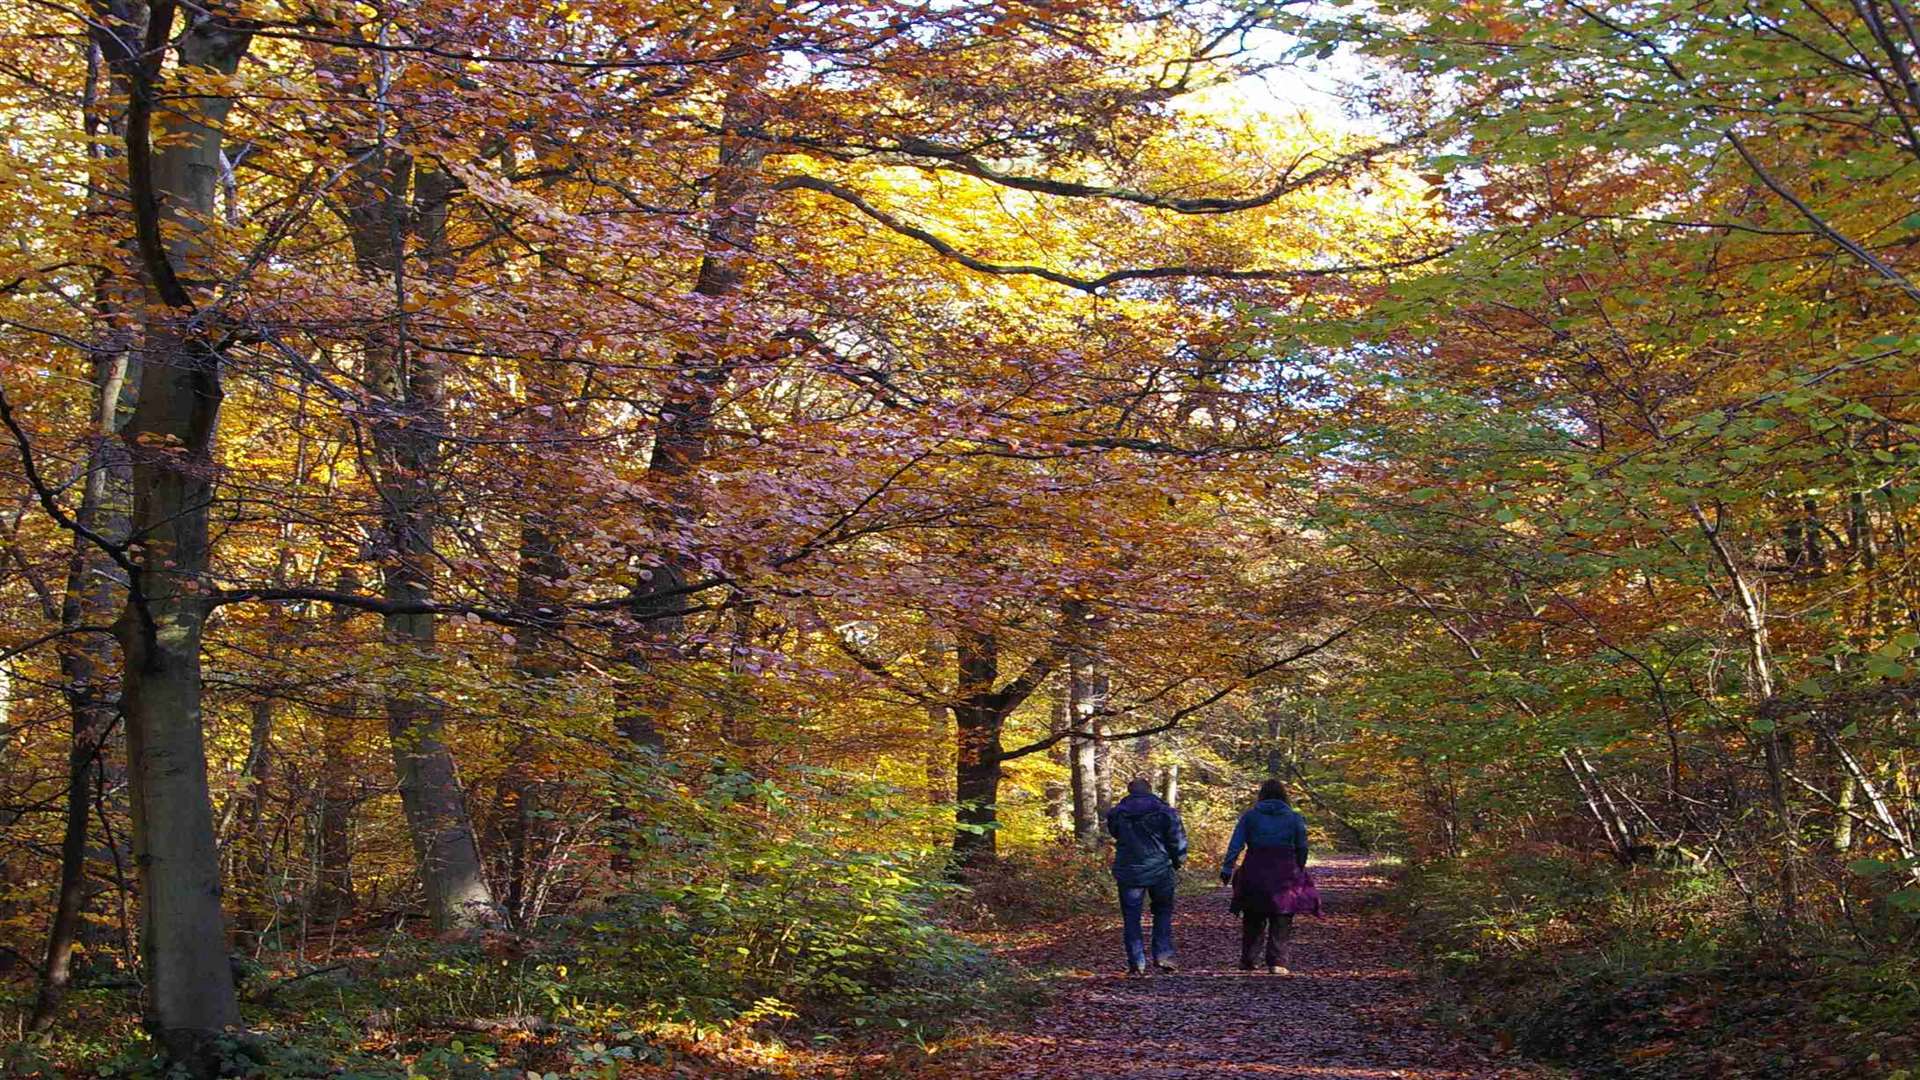 A stroll in Blean Woods Picture: John Davies